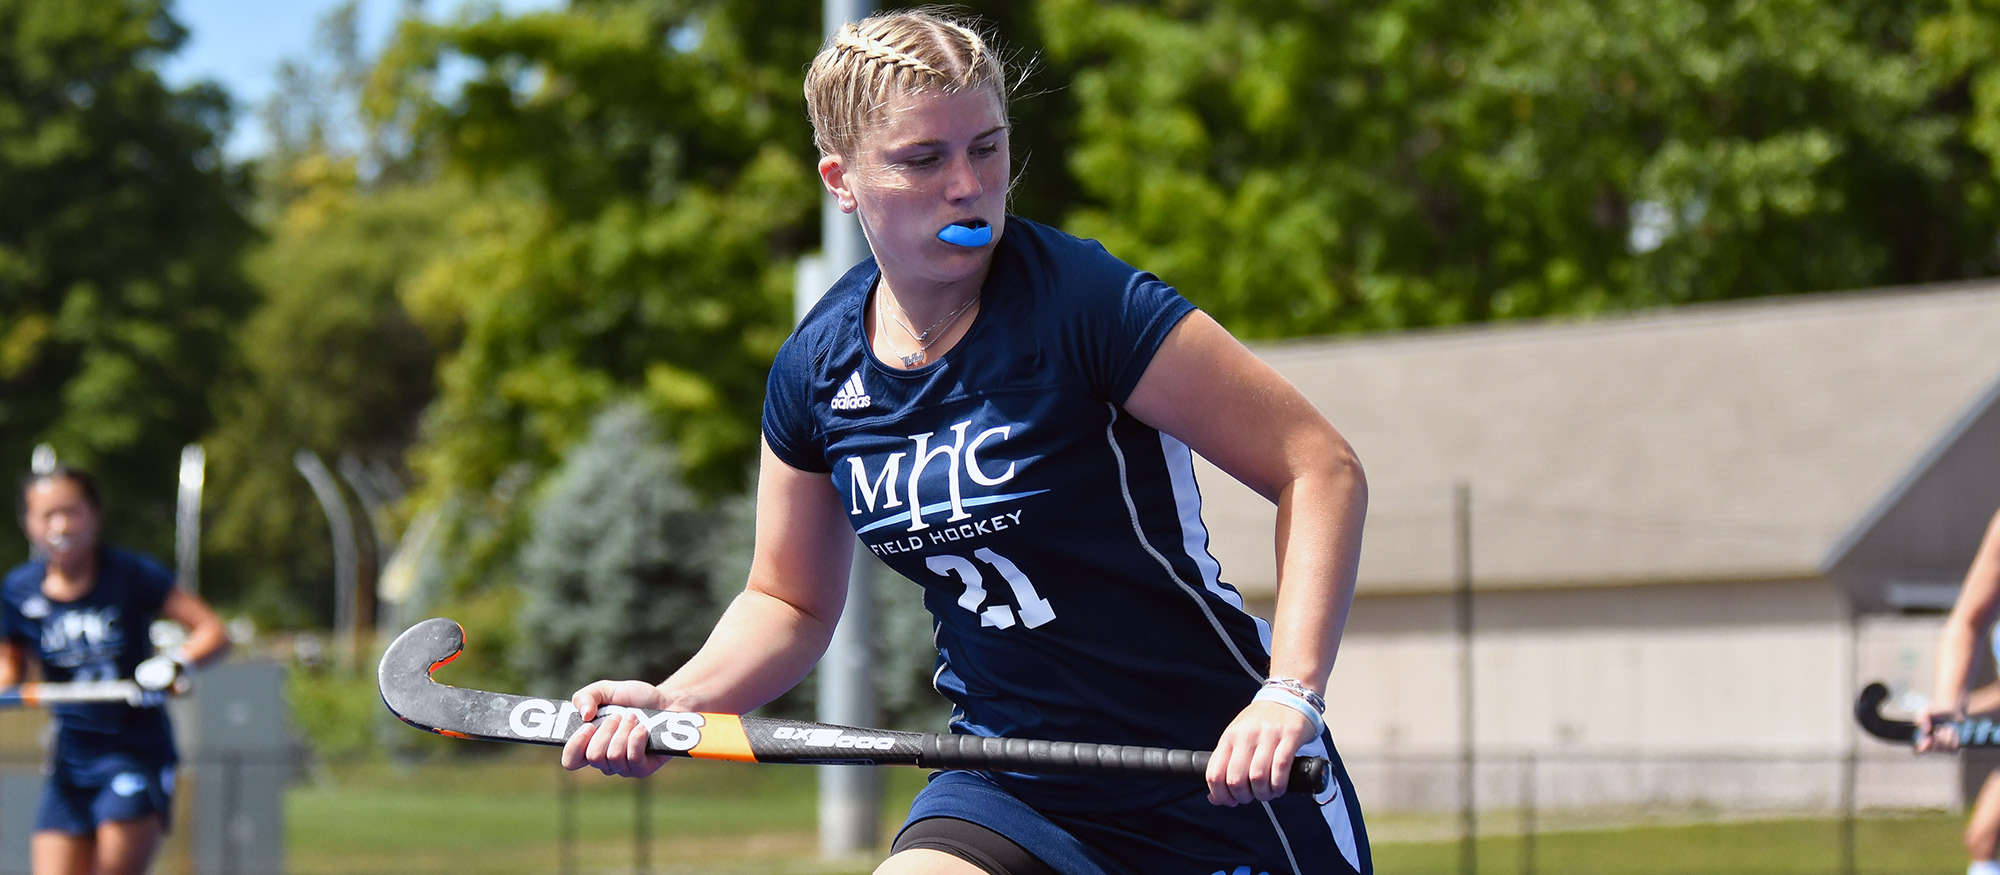 Mollee Malboeuf scored her sixth career goal to tie the game 1-1 in Mount Holyoke's 3-2 overtime loss to Thomas College on Sept. 10, 2022. (RJB Sports file photo)